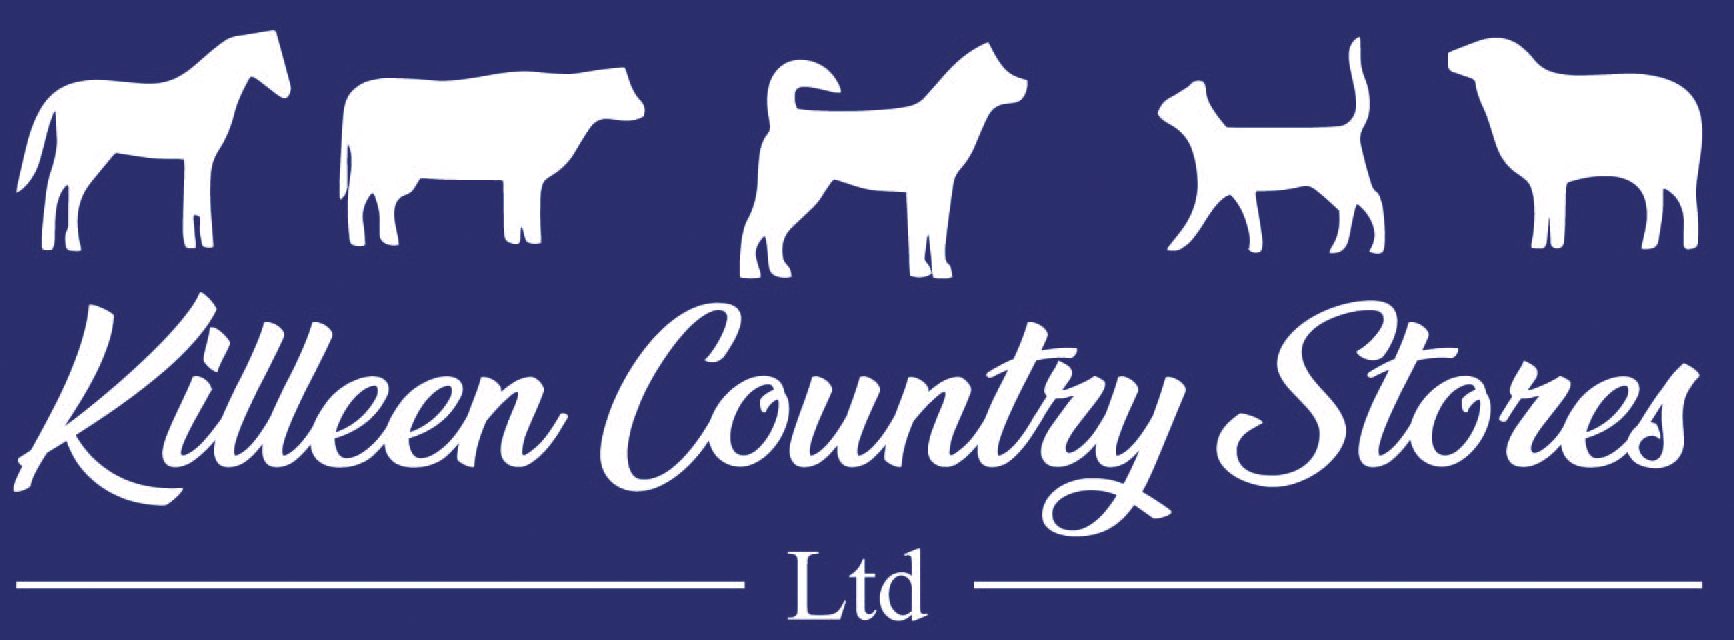 Killeen Country Stores FINAL logo